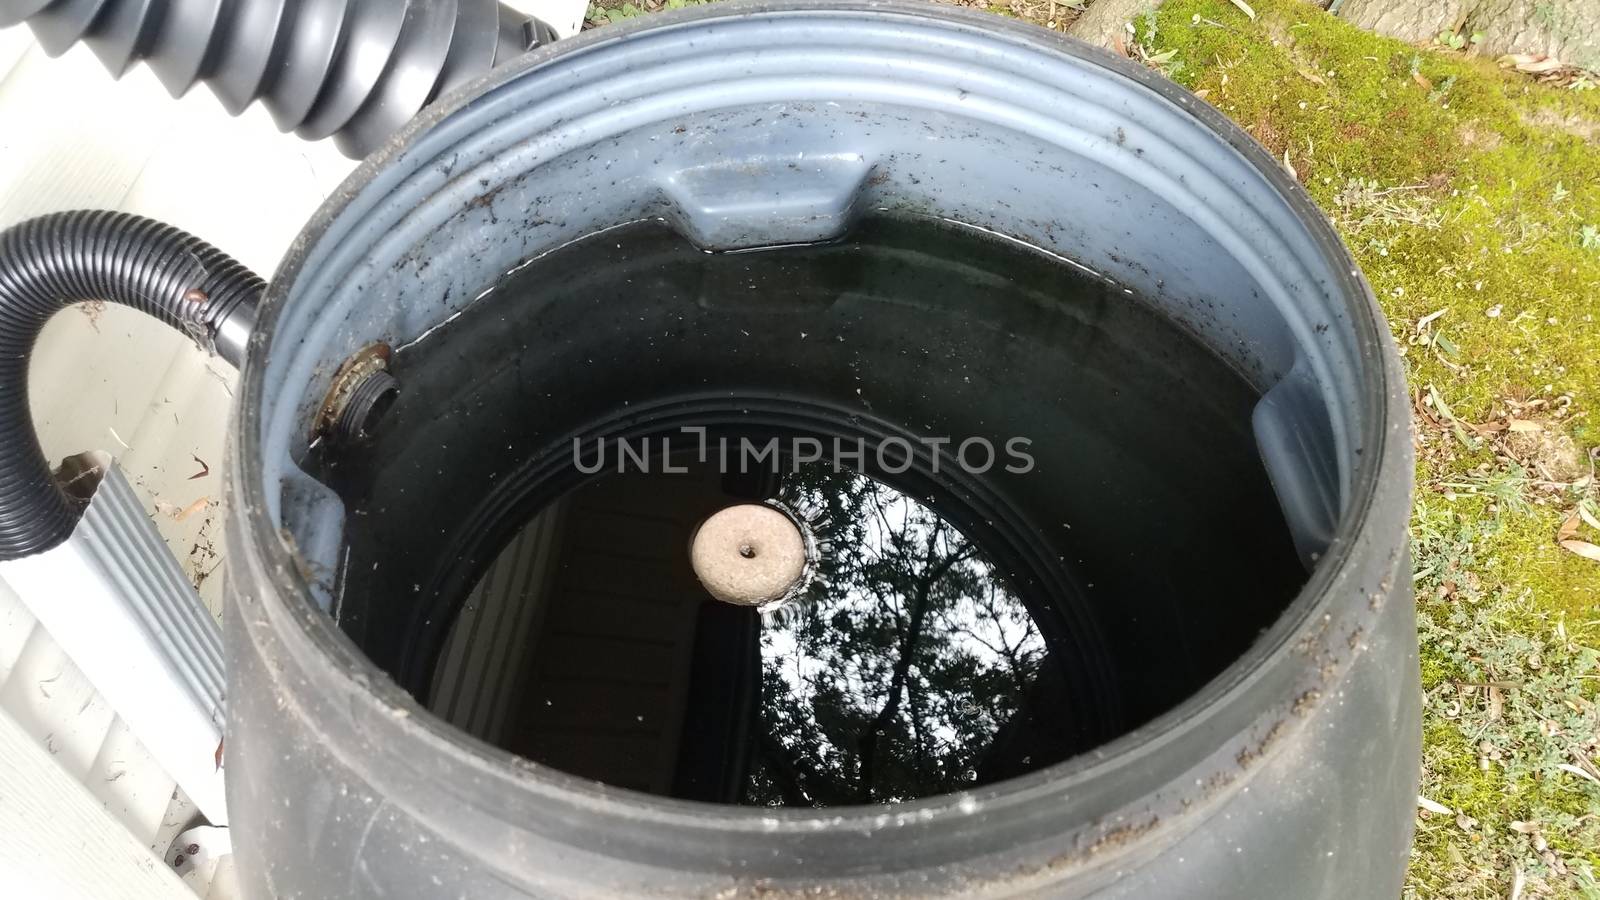 mosquito tablet insecticide floating in rain barrel by stockphotofan1